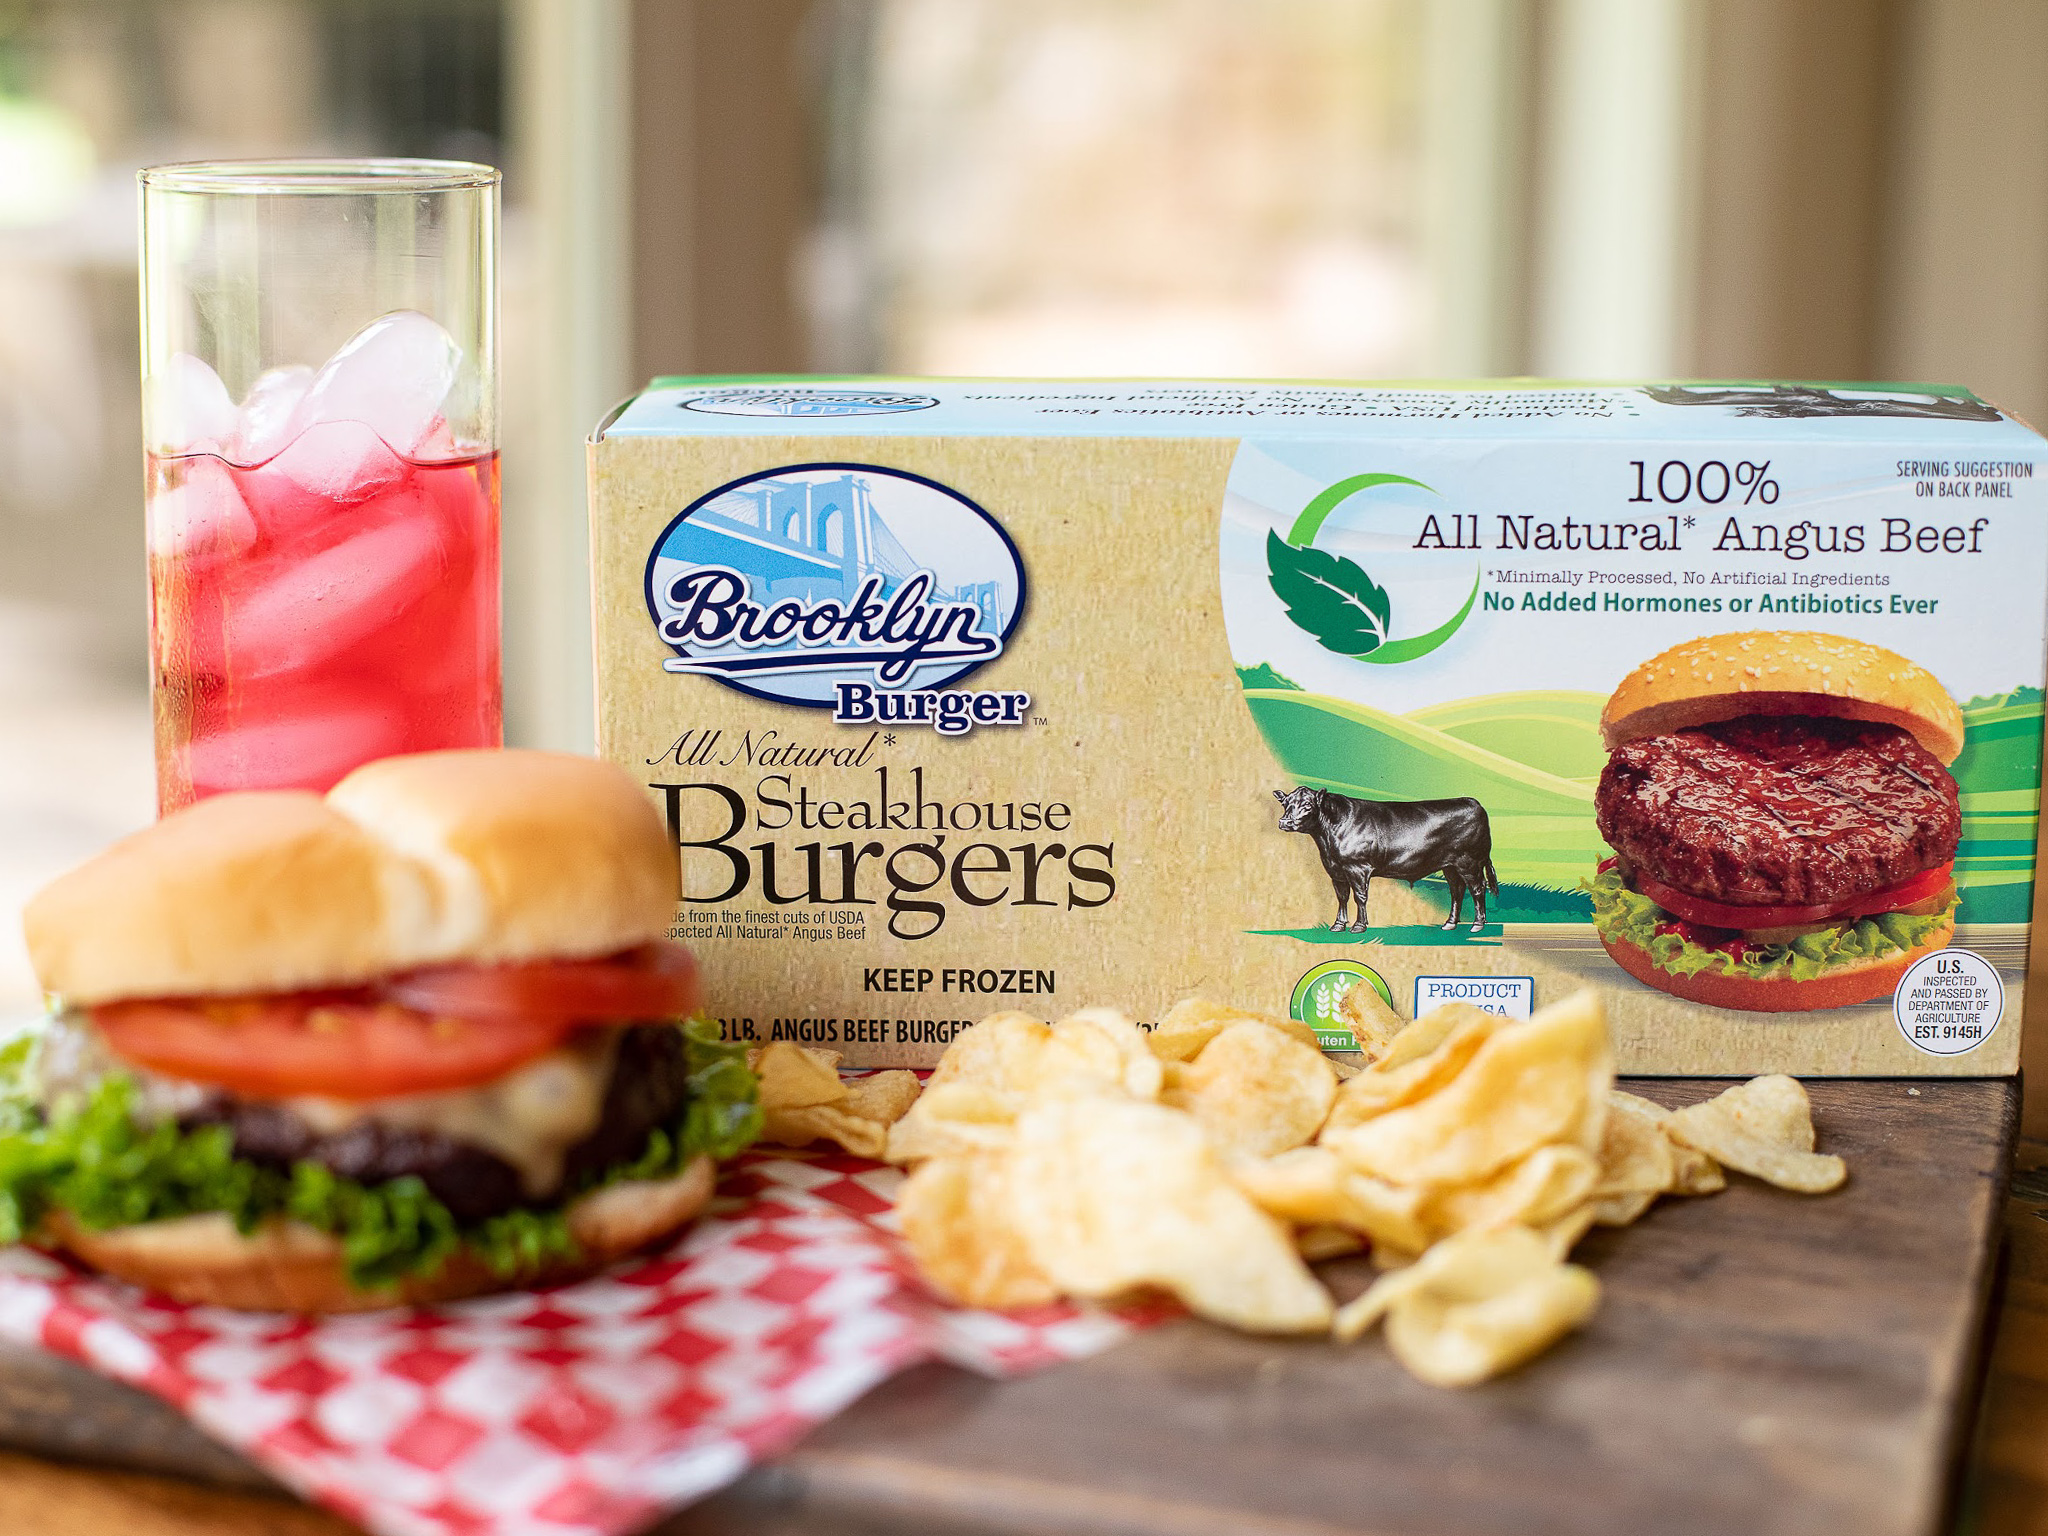 Brooklyn Burger Steakhouse Burgers Make Weeknight Meals Easy And Delicious! on I Heart Publix